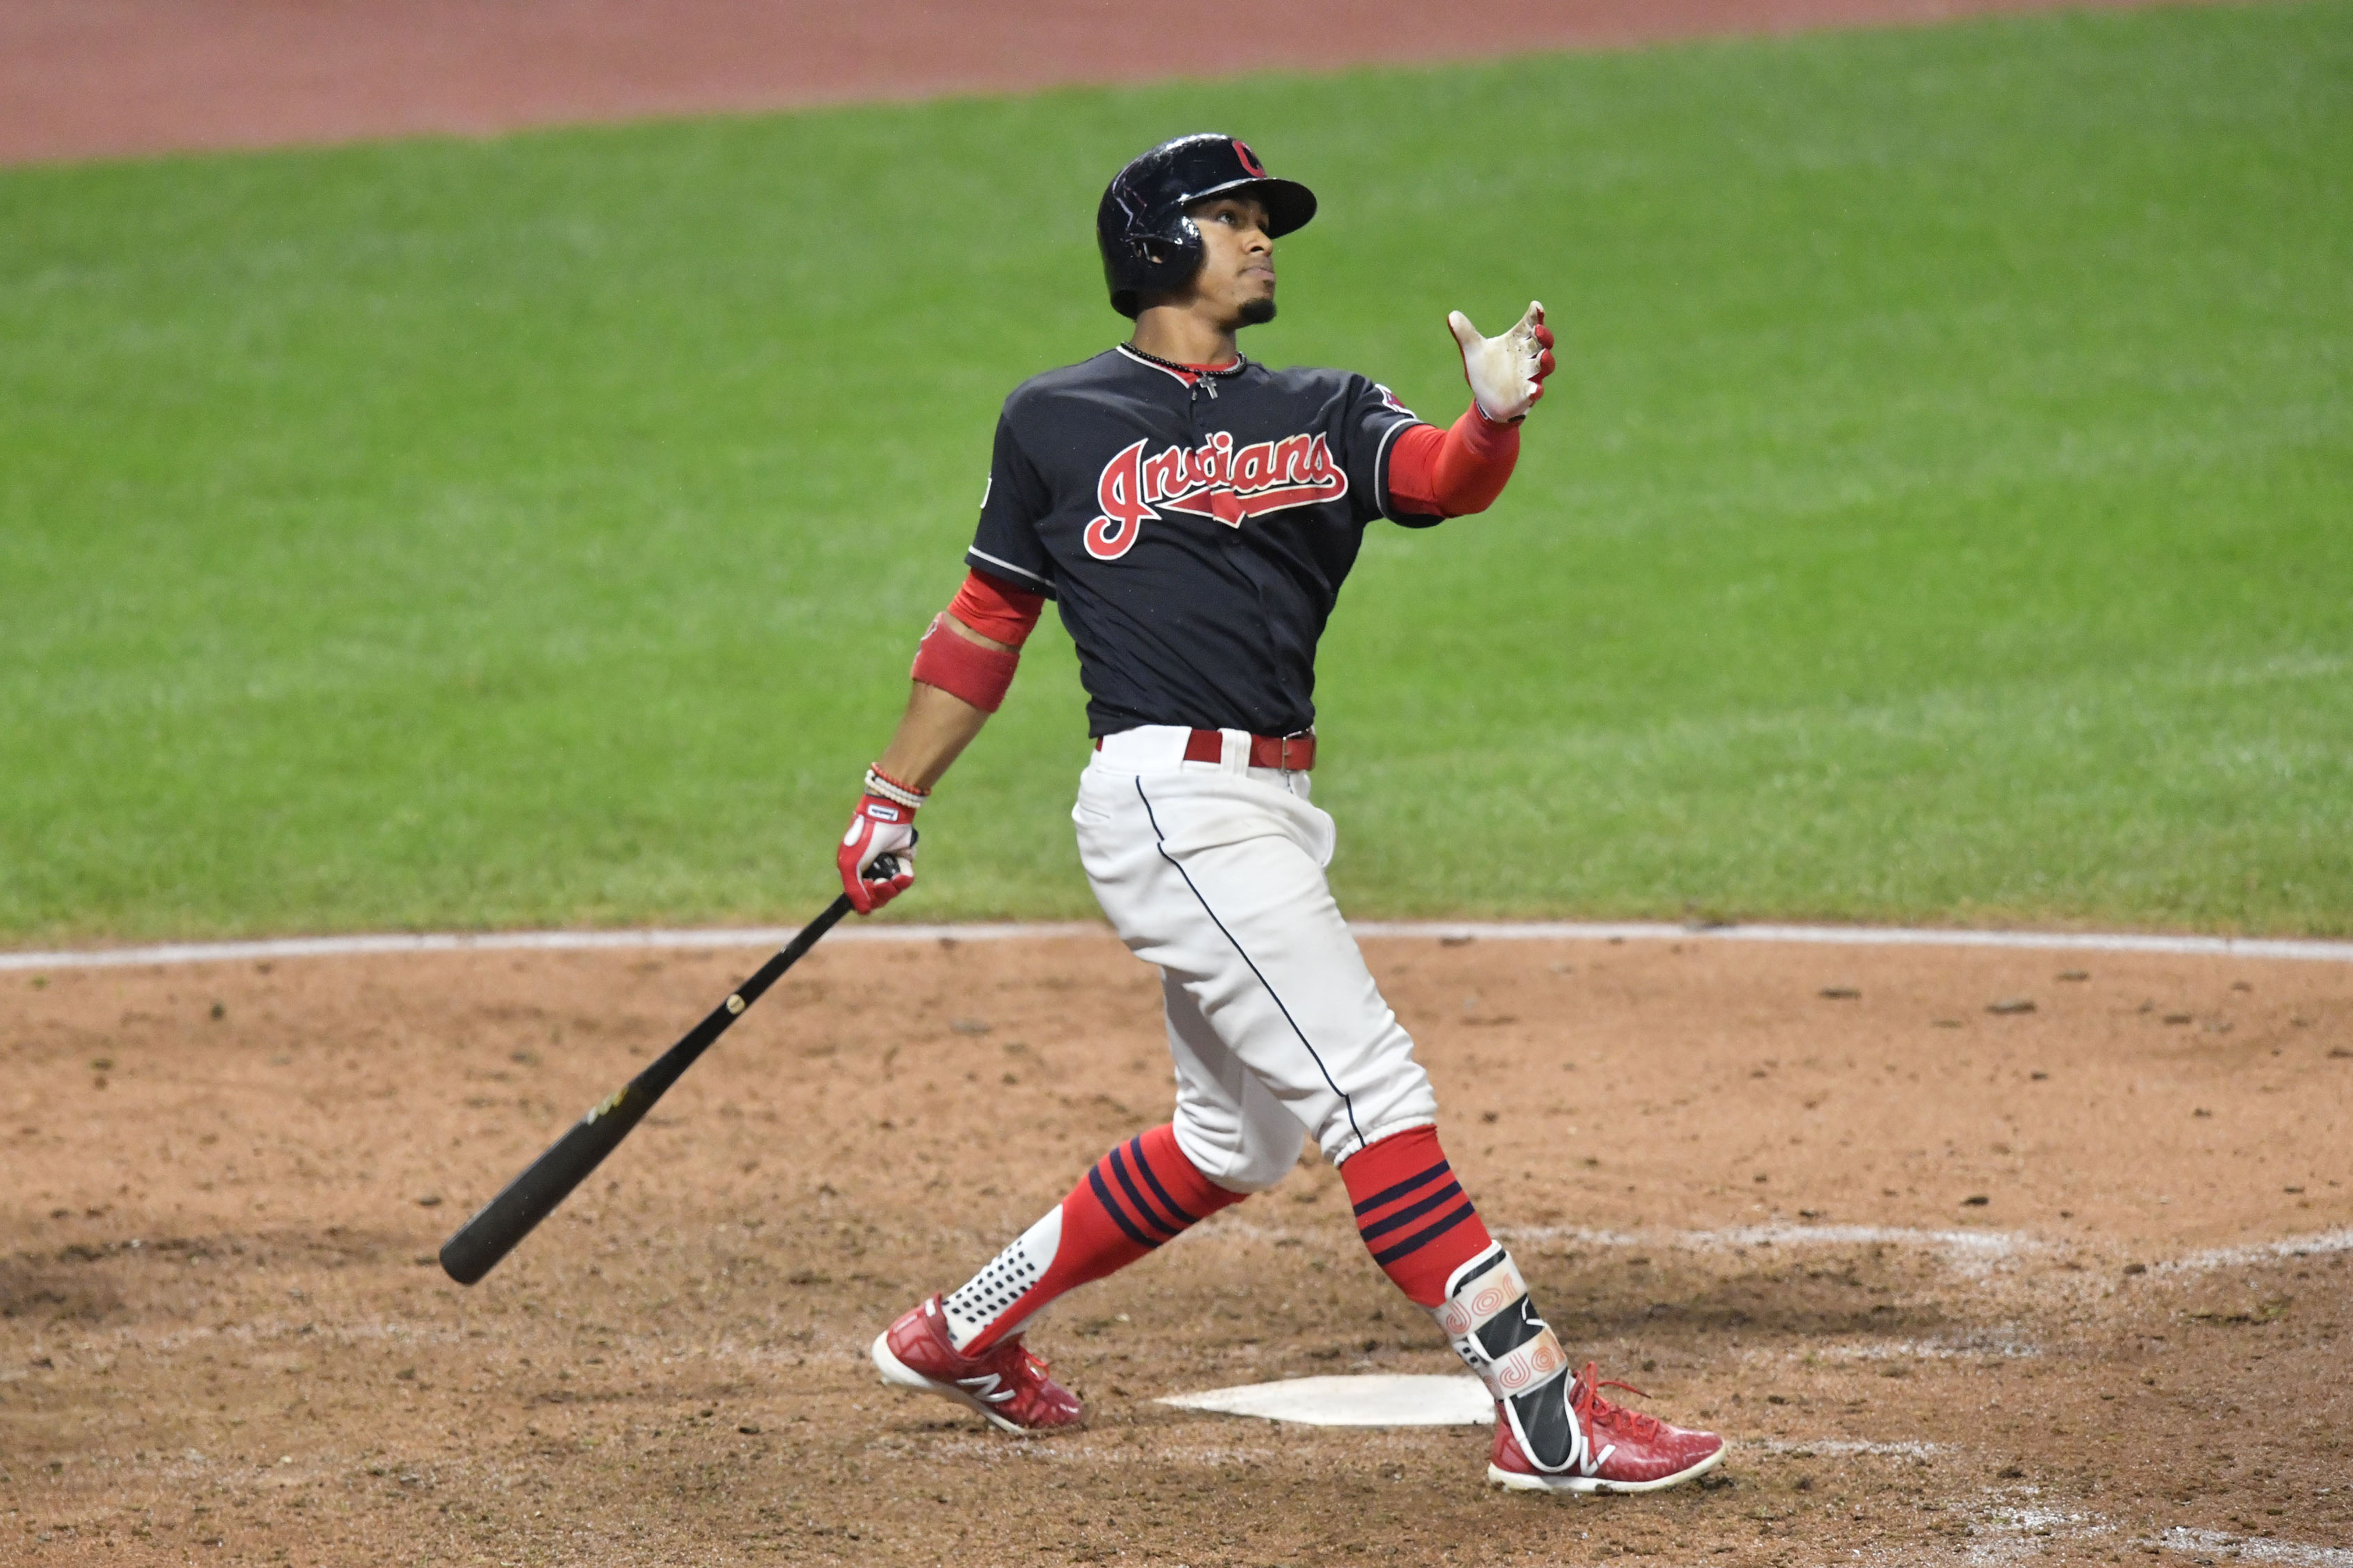 Francisco Lindor is Key to Cleveland Indians Playoff Success